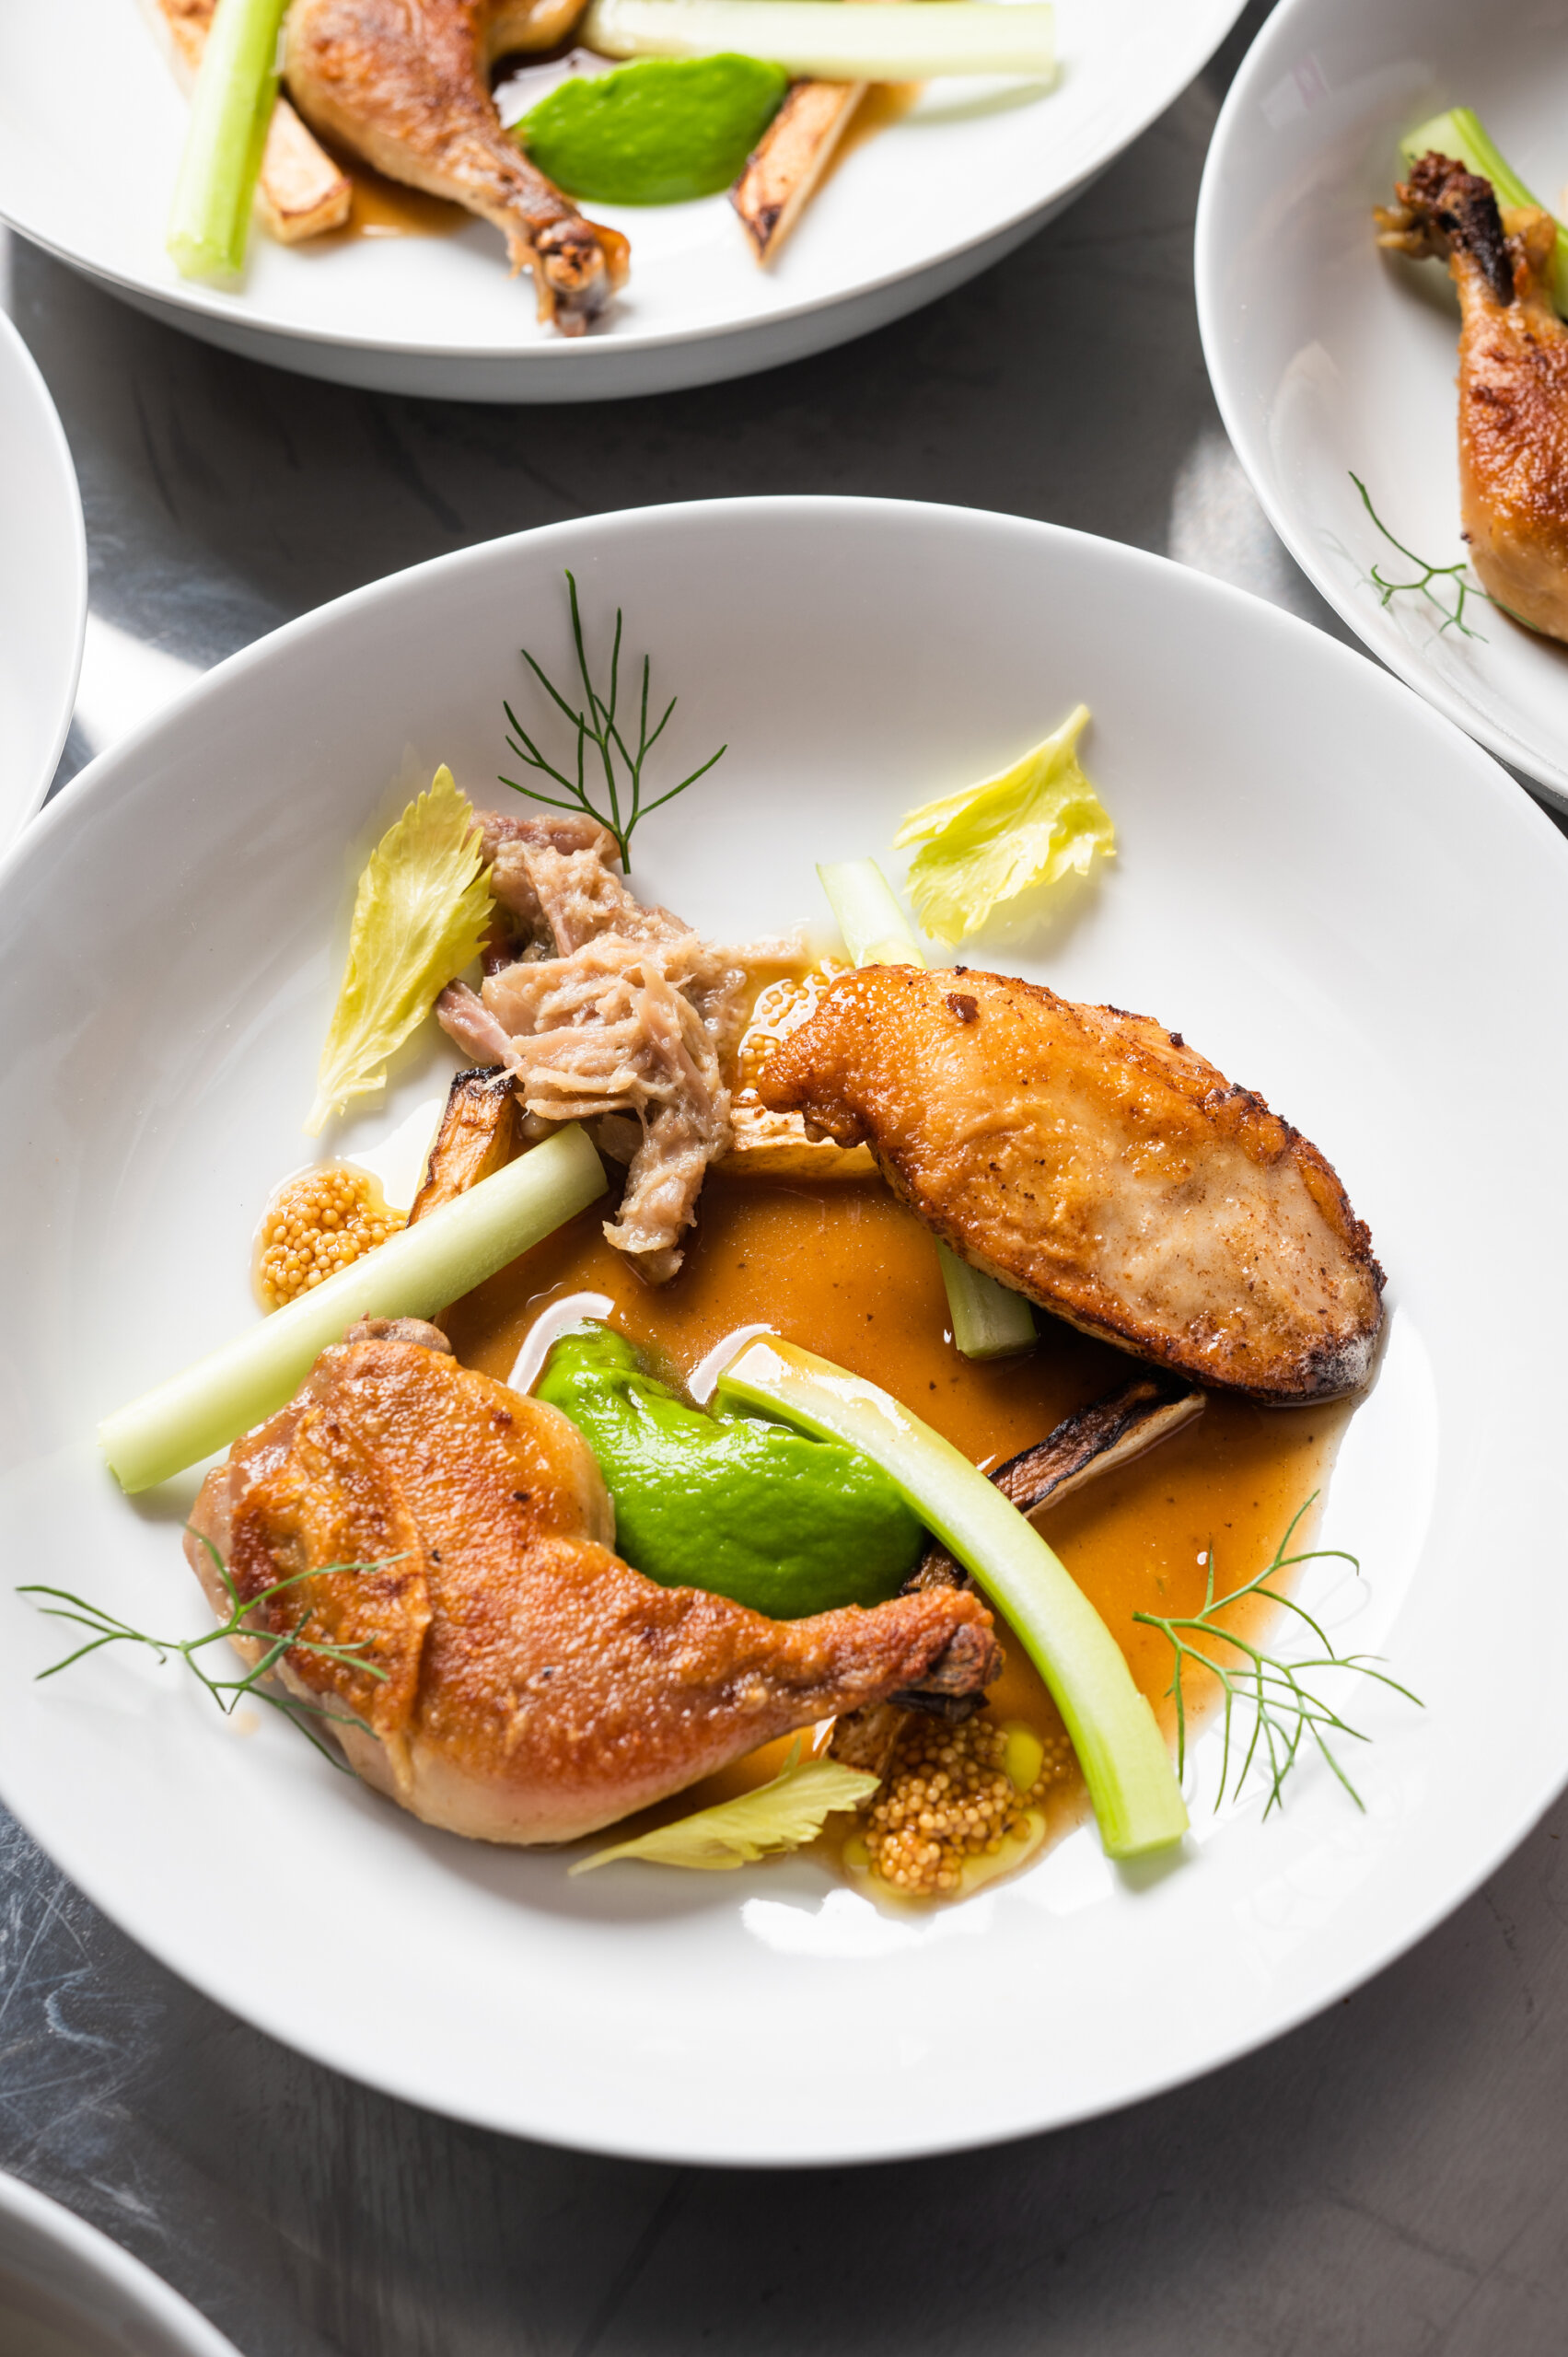 Poussin with celery, pickled mustard seeds, and jus